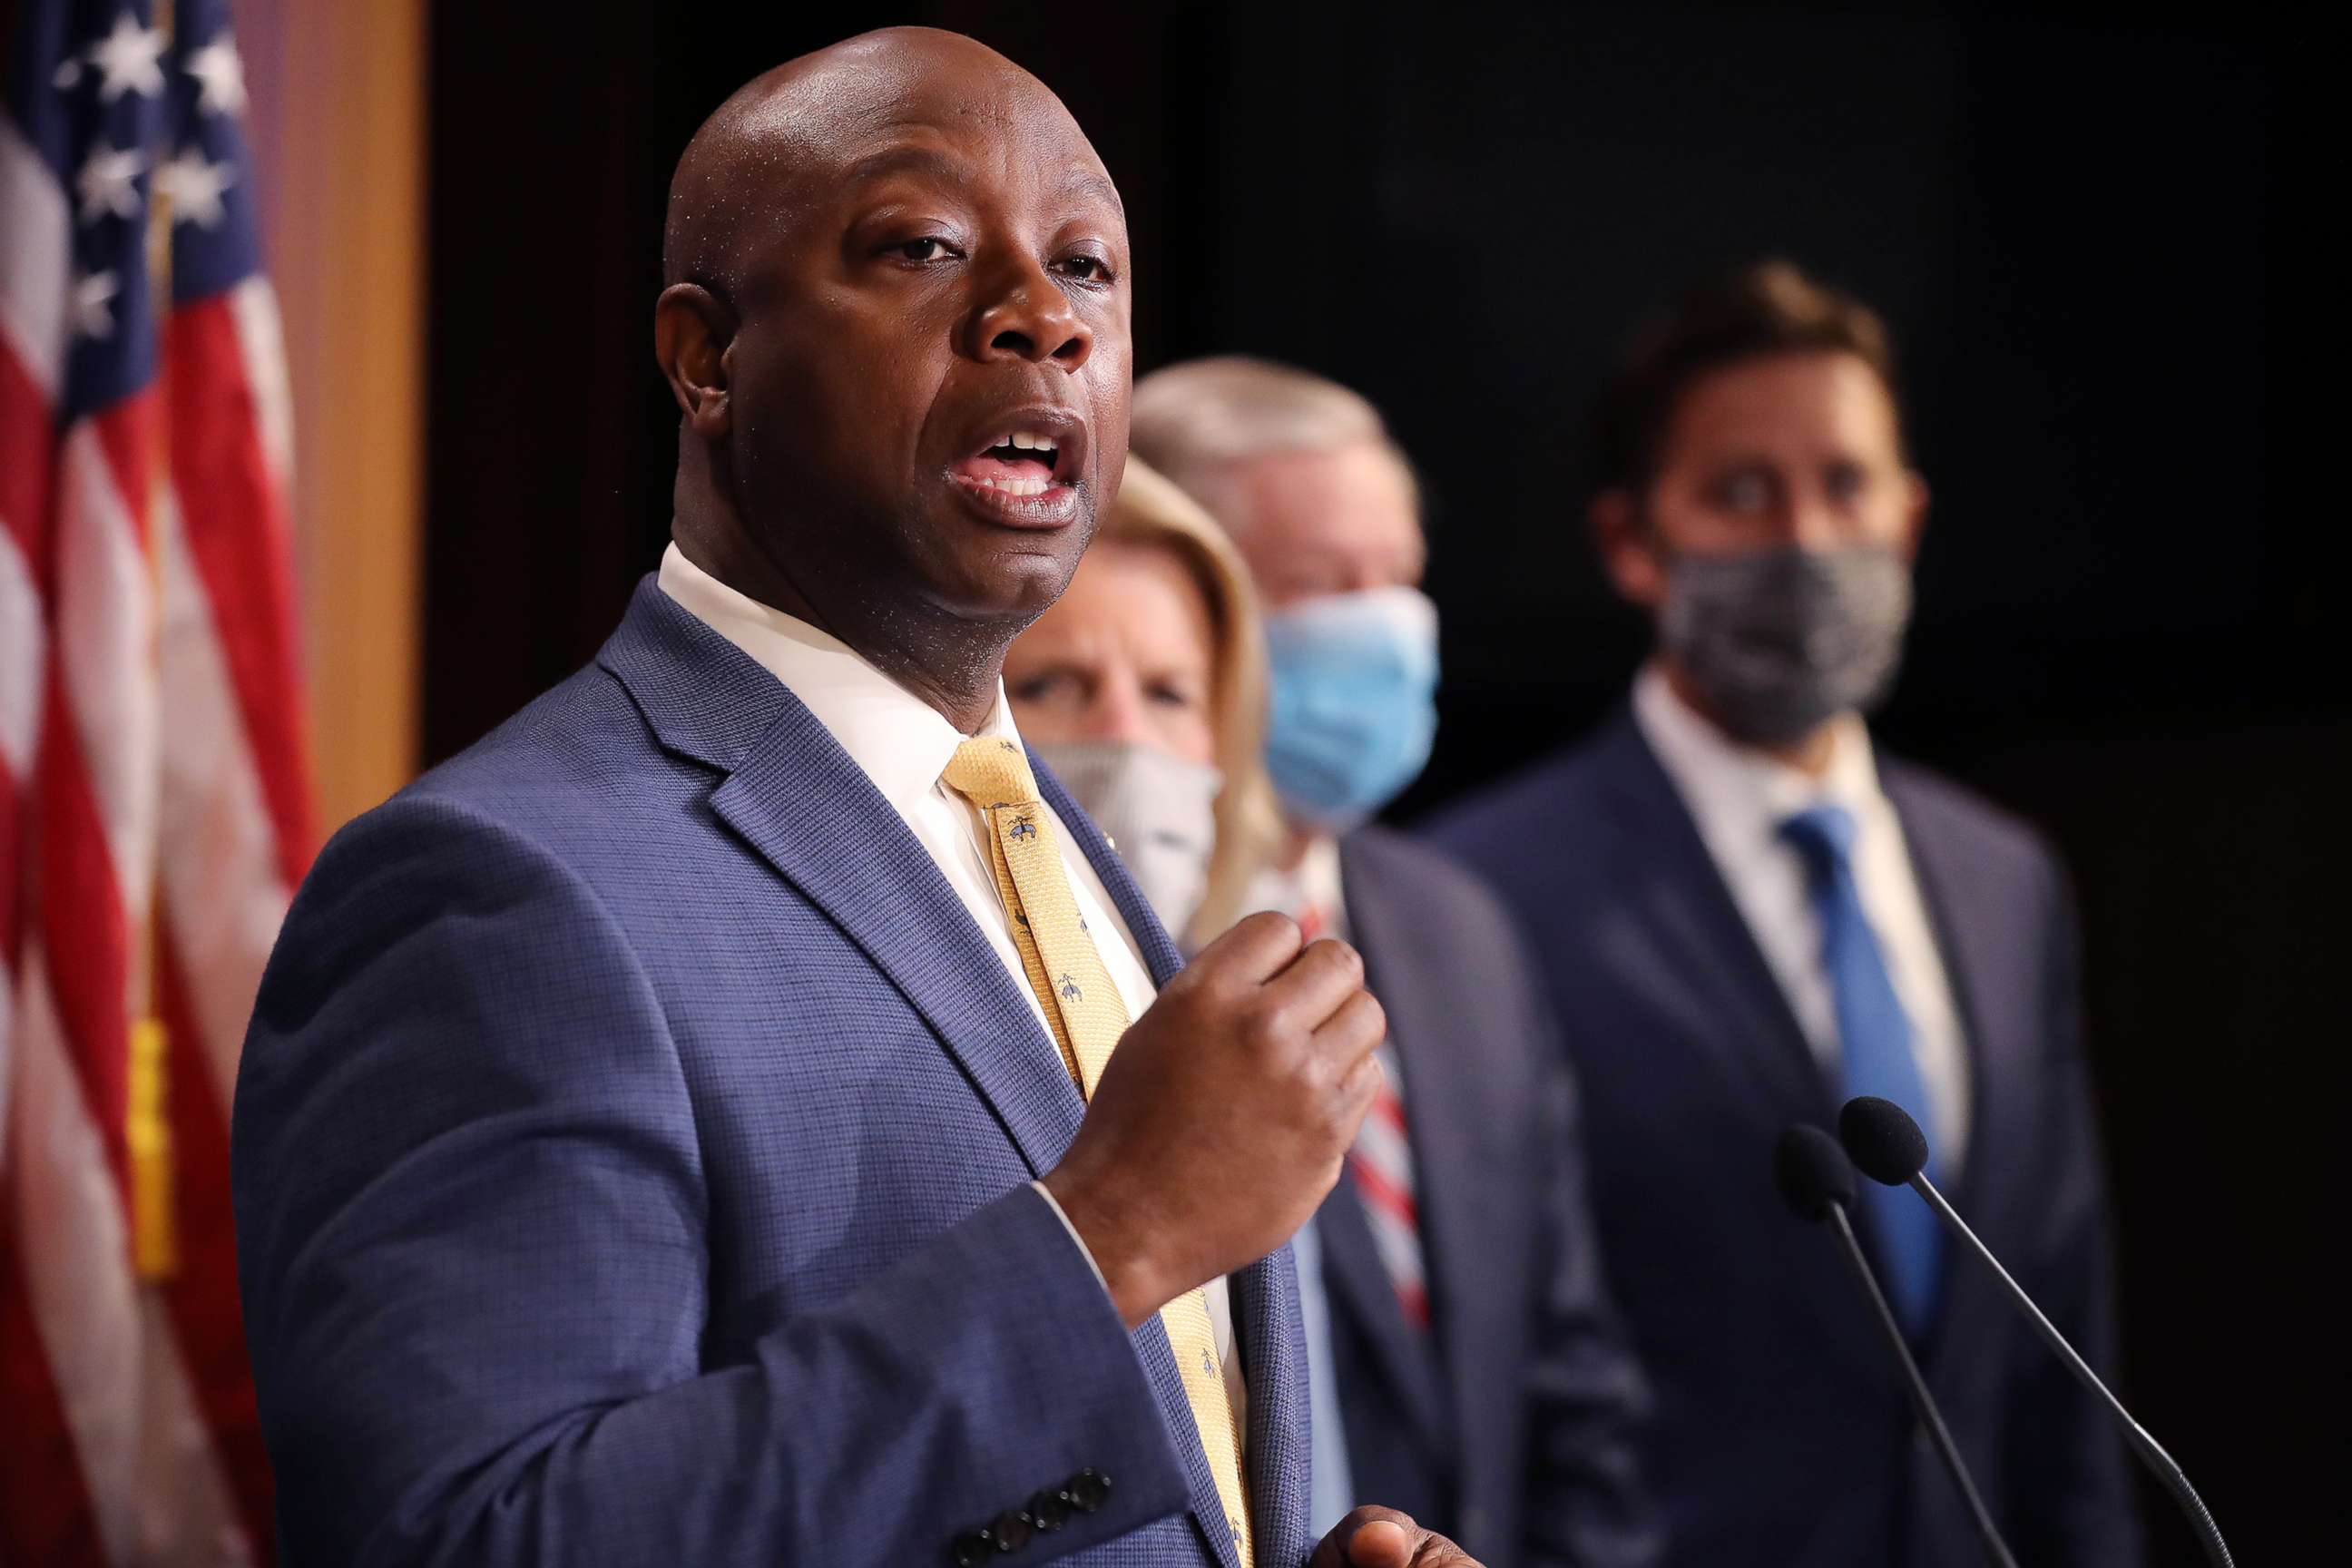 PHOTO:Sen. Tim Scott is joined by fellow Republican lawmakers for a news conference to unveil the GOP's legislation to address racial disparities in law enforcement at the U.S. Capitol, June 17, 2020, in Washington, D.C.